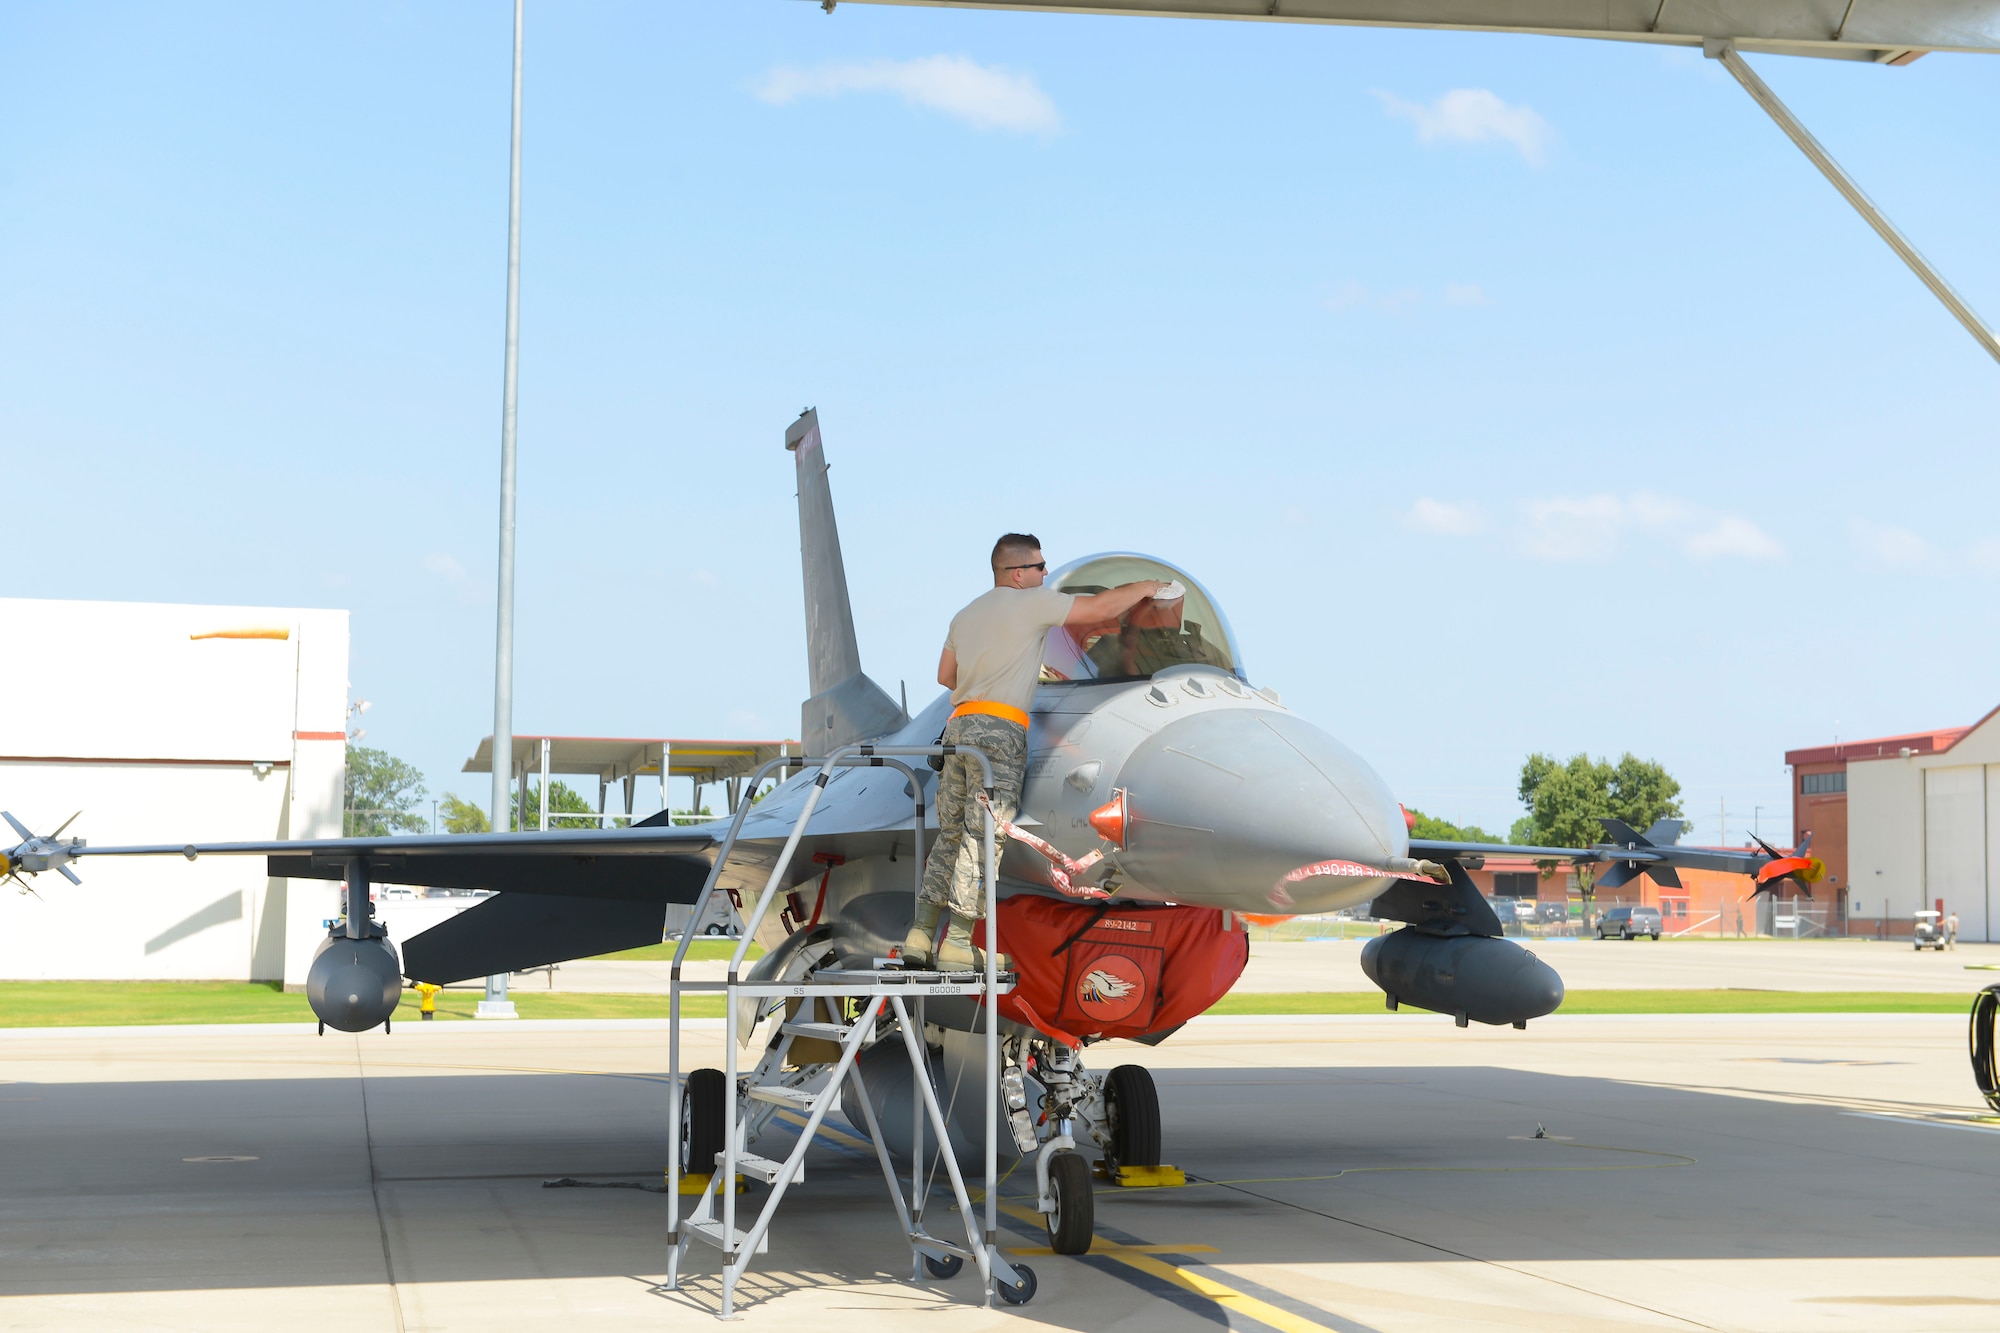 Staff Sgt. Cody Brown, 138th Maintenance Squadron, polishes the canopy of an F-16 fighter jet as part of the post-flight procedures on July 13, 2016 at the 138th Fighter Wing. The wraparound canopy provides ideal light in-flight and can withstand the impact of a 4 pound bird at 550 knots. (Air National Guard photo/Master Sgt. Roberta A. Thompson)